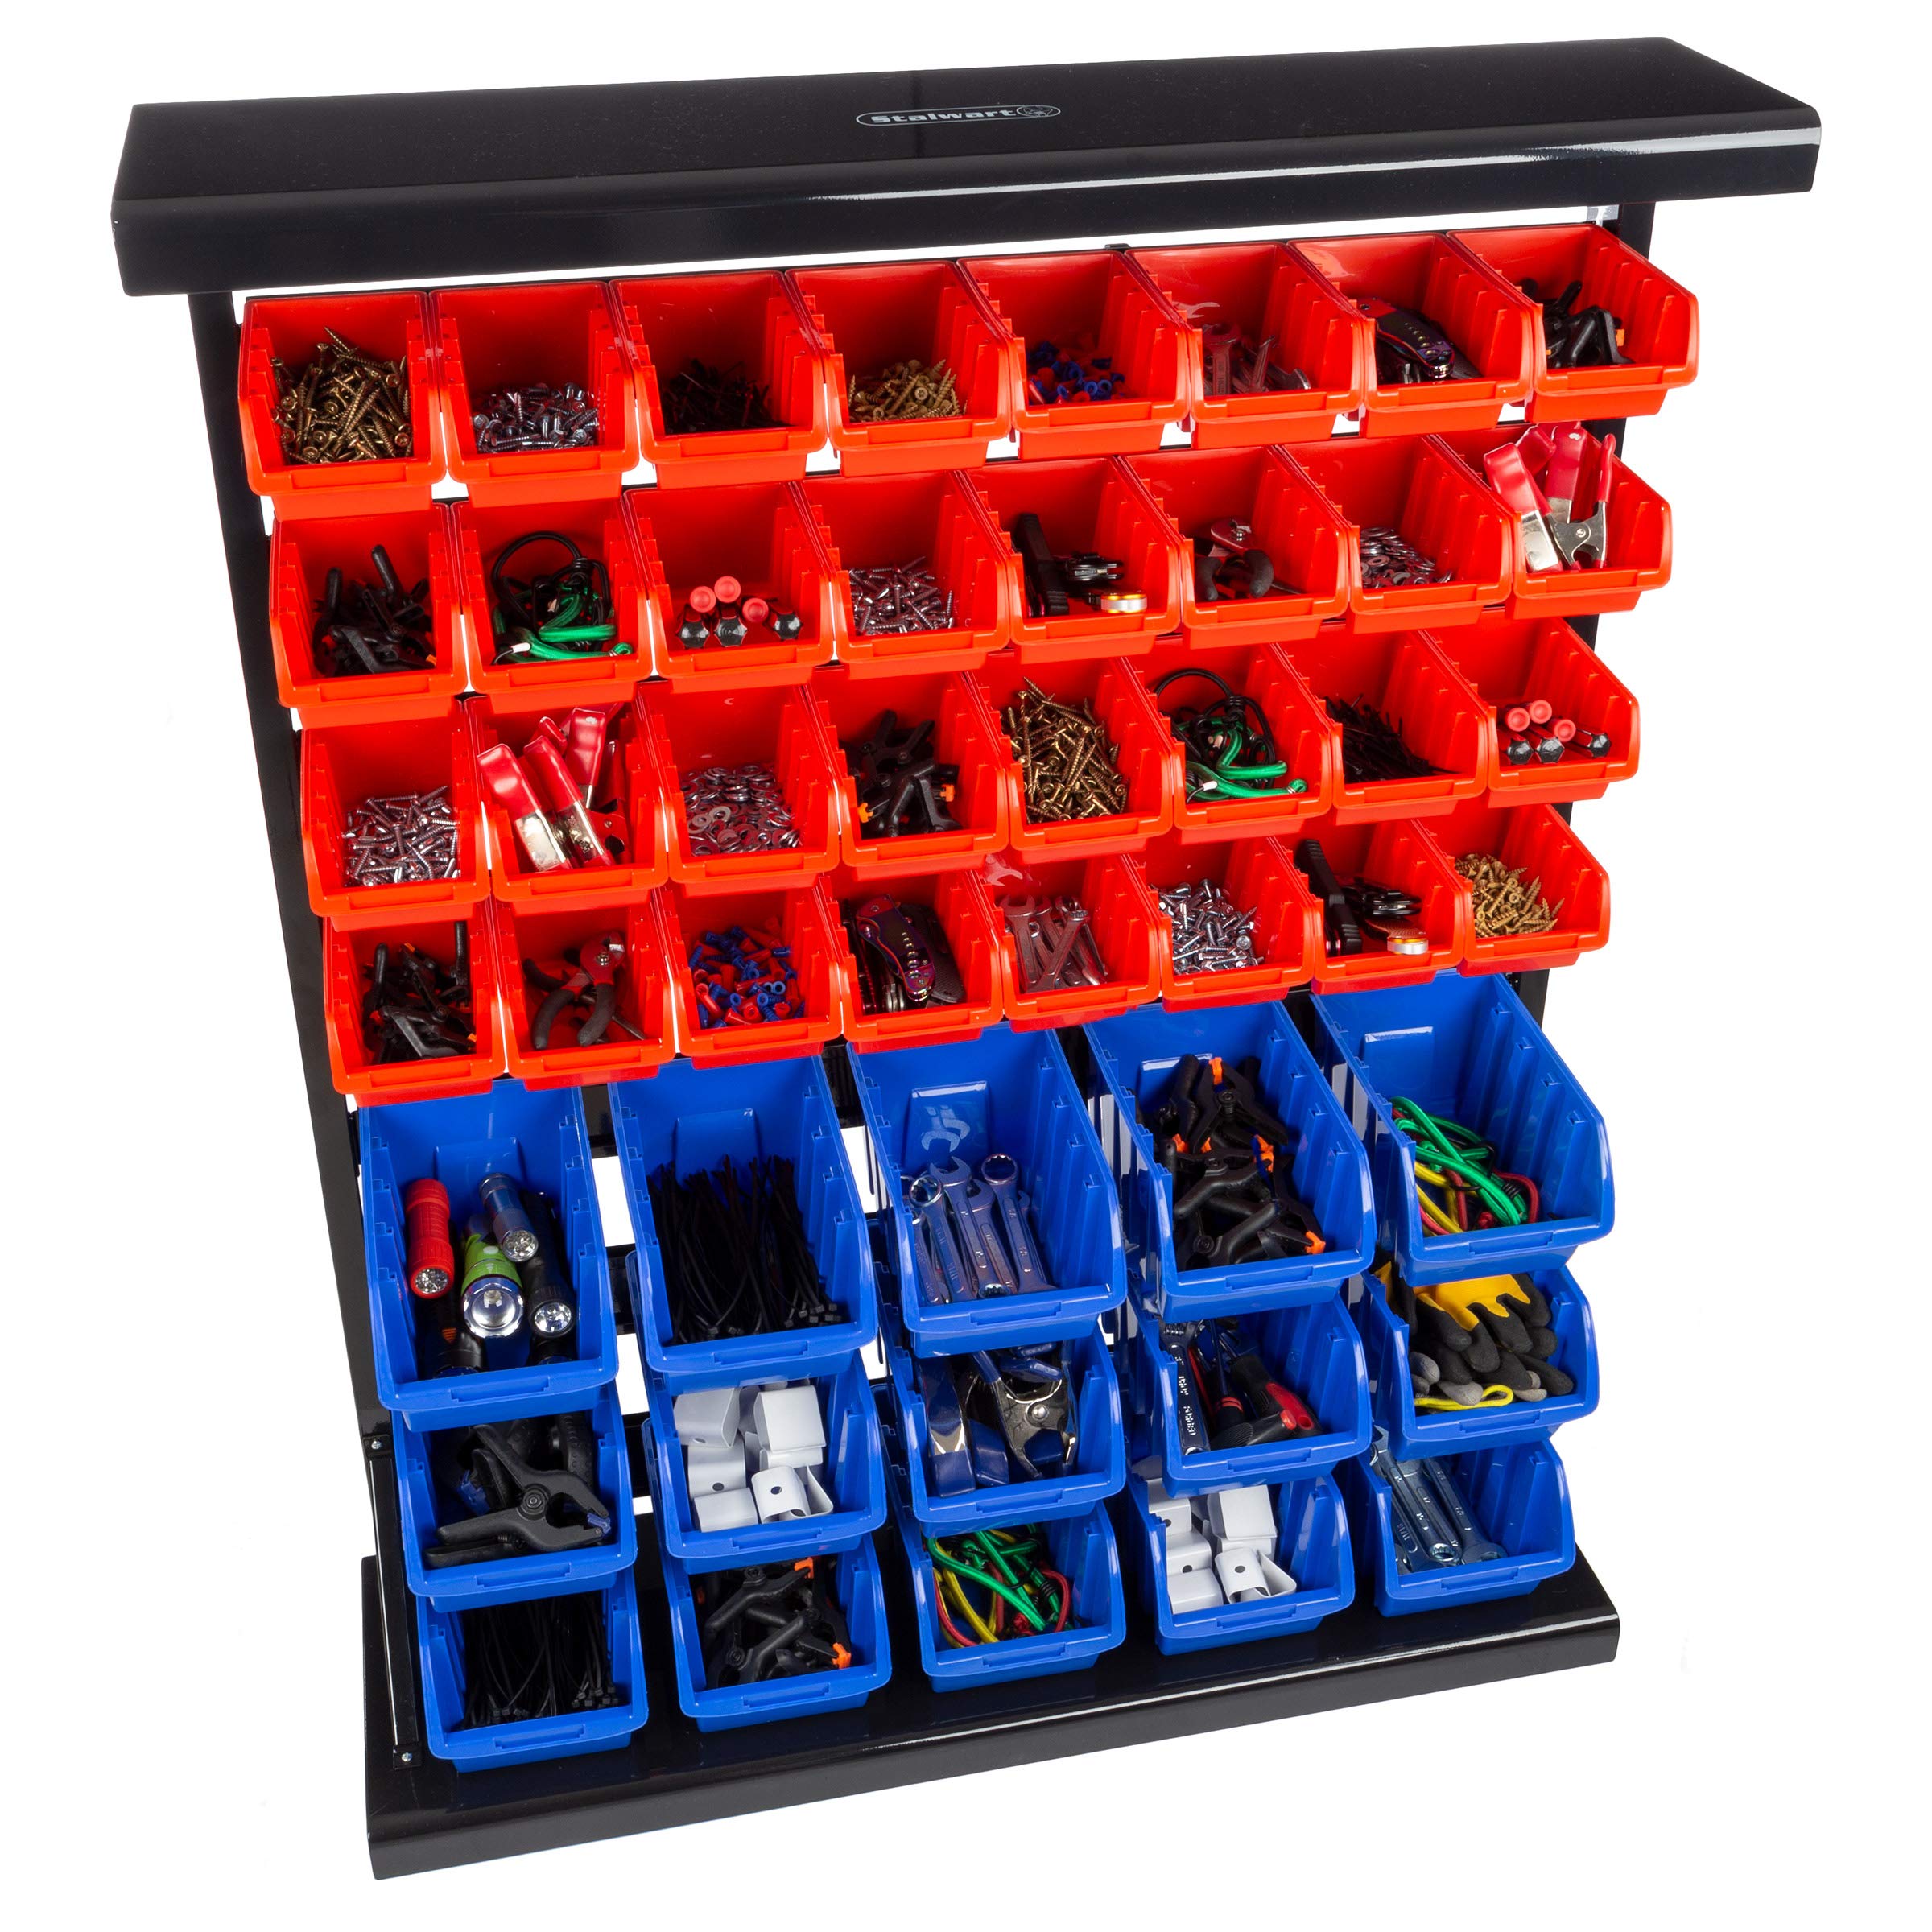 Stalwart 75-ST6079 orage Rack Organizer- Wall Mountable Container with Removeable Drawers for Tools, Hardware, Crafts, Office Supplies and More by Stalwart